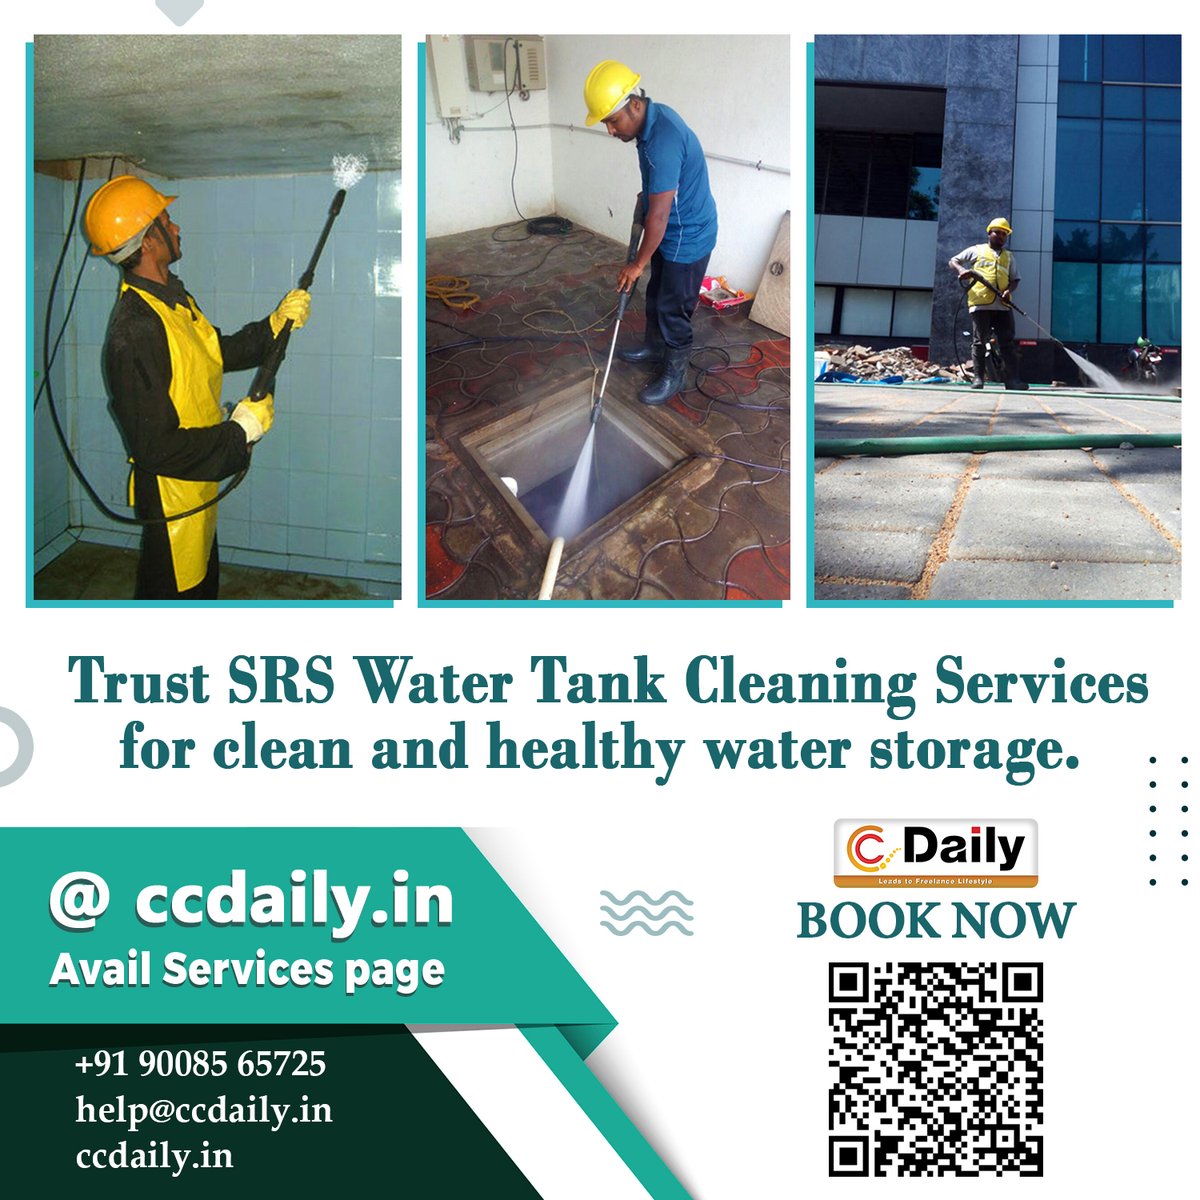 Keep your water storage healthy with our professional cleaning services at SRS Water Tank Cleaning Services.

Book appointments now: ccdaily.in/services/produ…
Visit: ccdaily.in

#WaterTankCleaning #CleanWater #HealthyWater #WaterPurification #Bangalore #WaterSafety